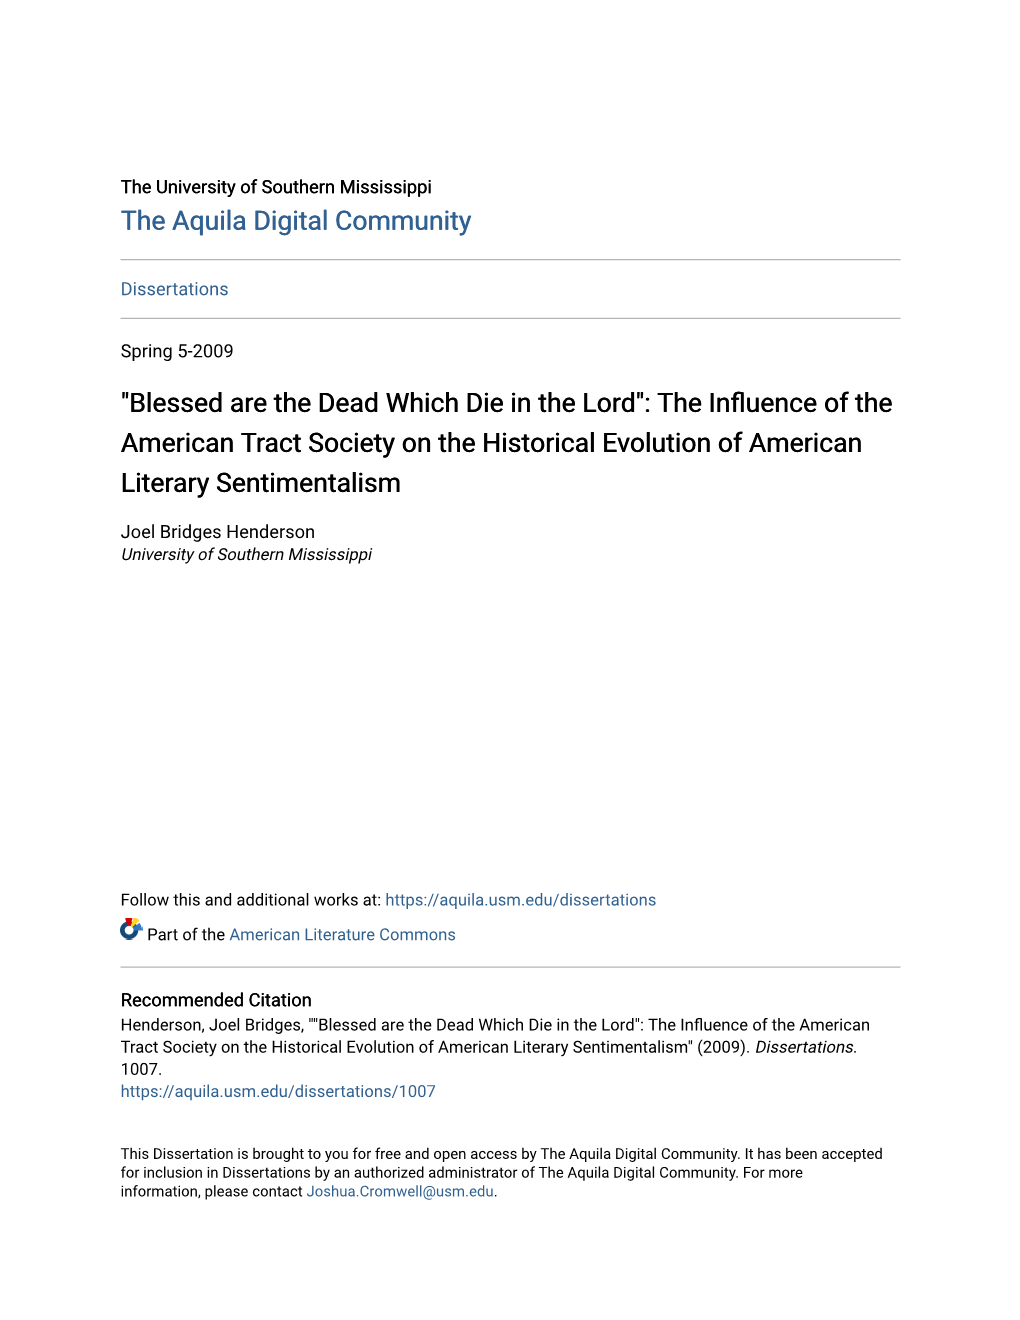 The Influence of the American Tract Society on the Historical Evolution of American Literary Sentimentalism